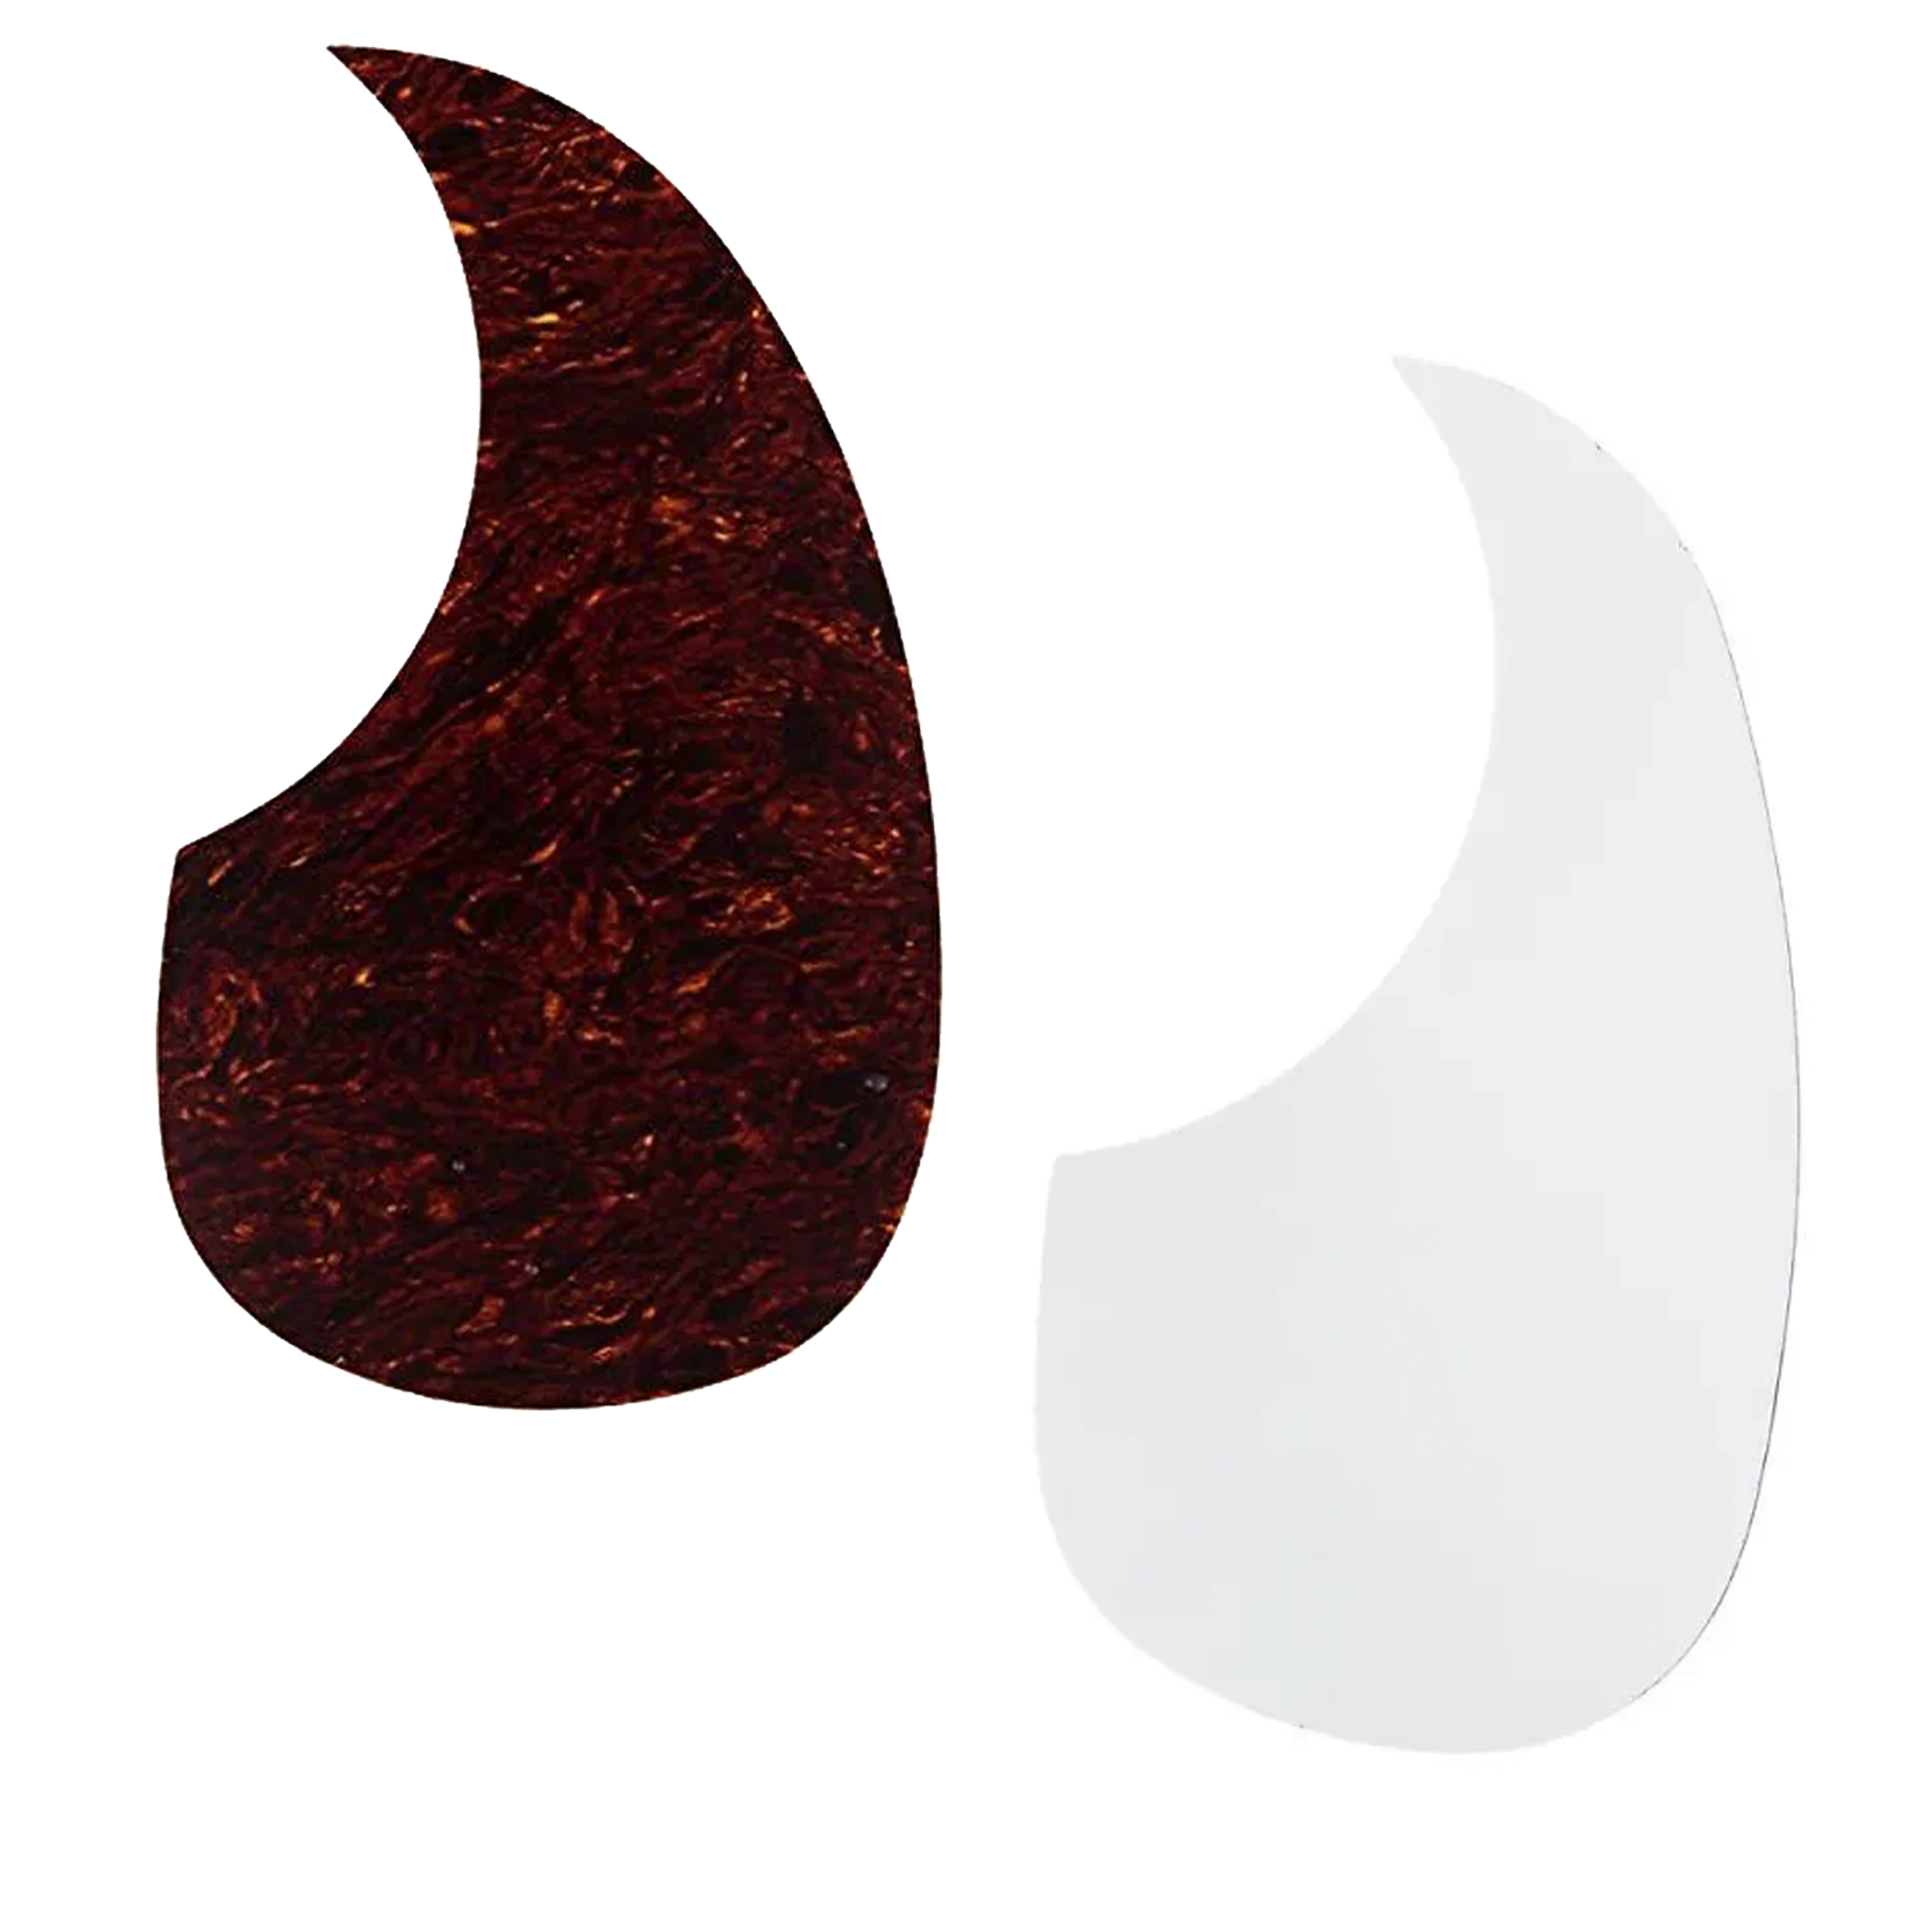 AllParts Thin Acoustic Pickguard with Adhesive Backing (Clear, Tortoise)